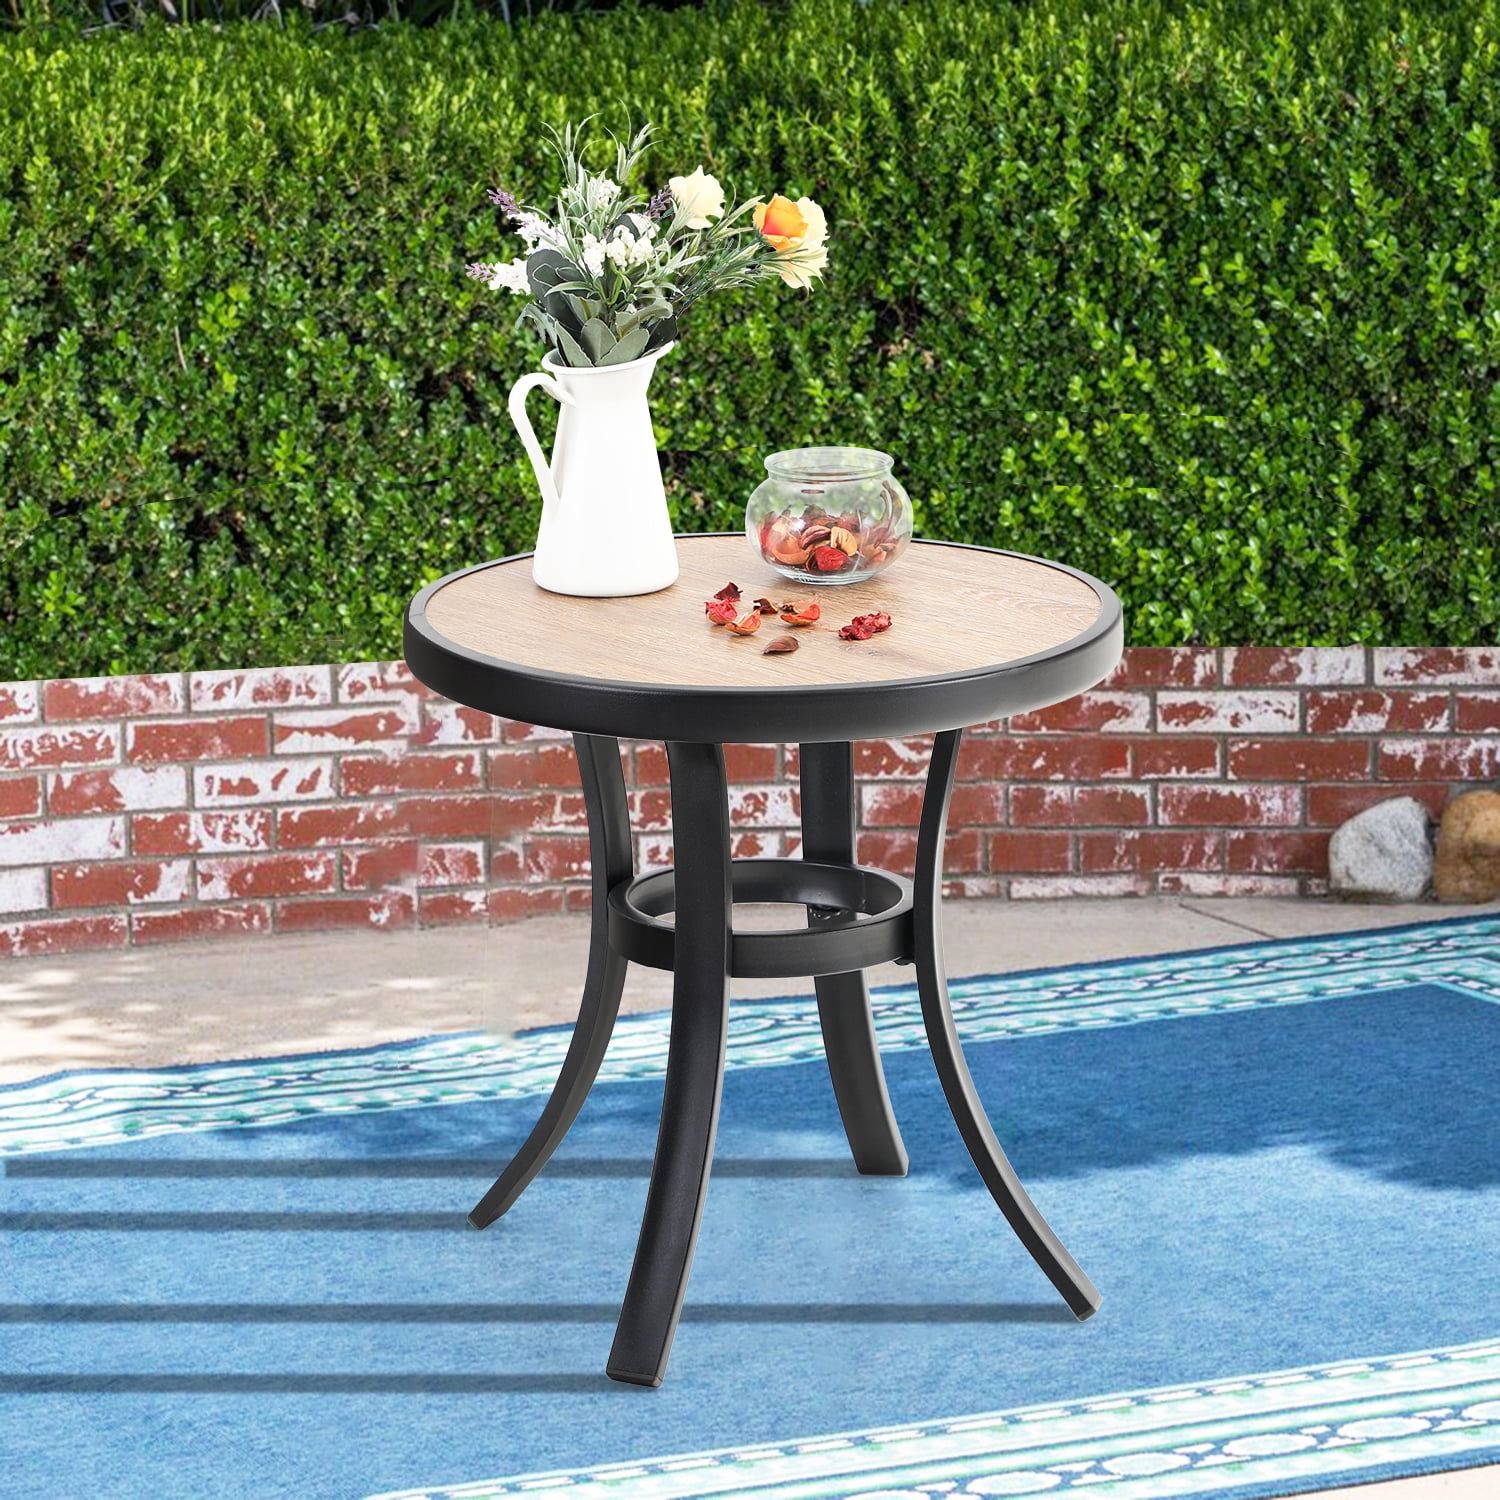 Mf Studio 19 Inches Bistro Side Table, Outdoor Coffee Table Wooden Like Within Modern Outdoor Patio Coffee Tables (View 8 of 20)